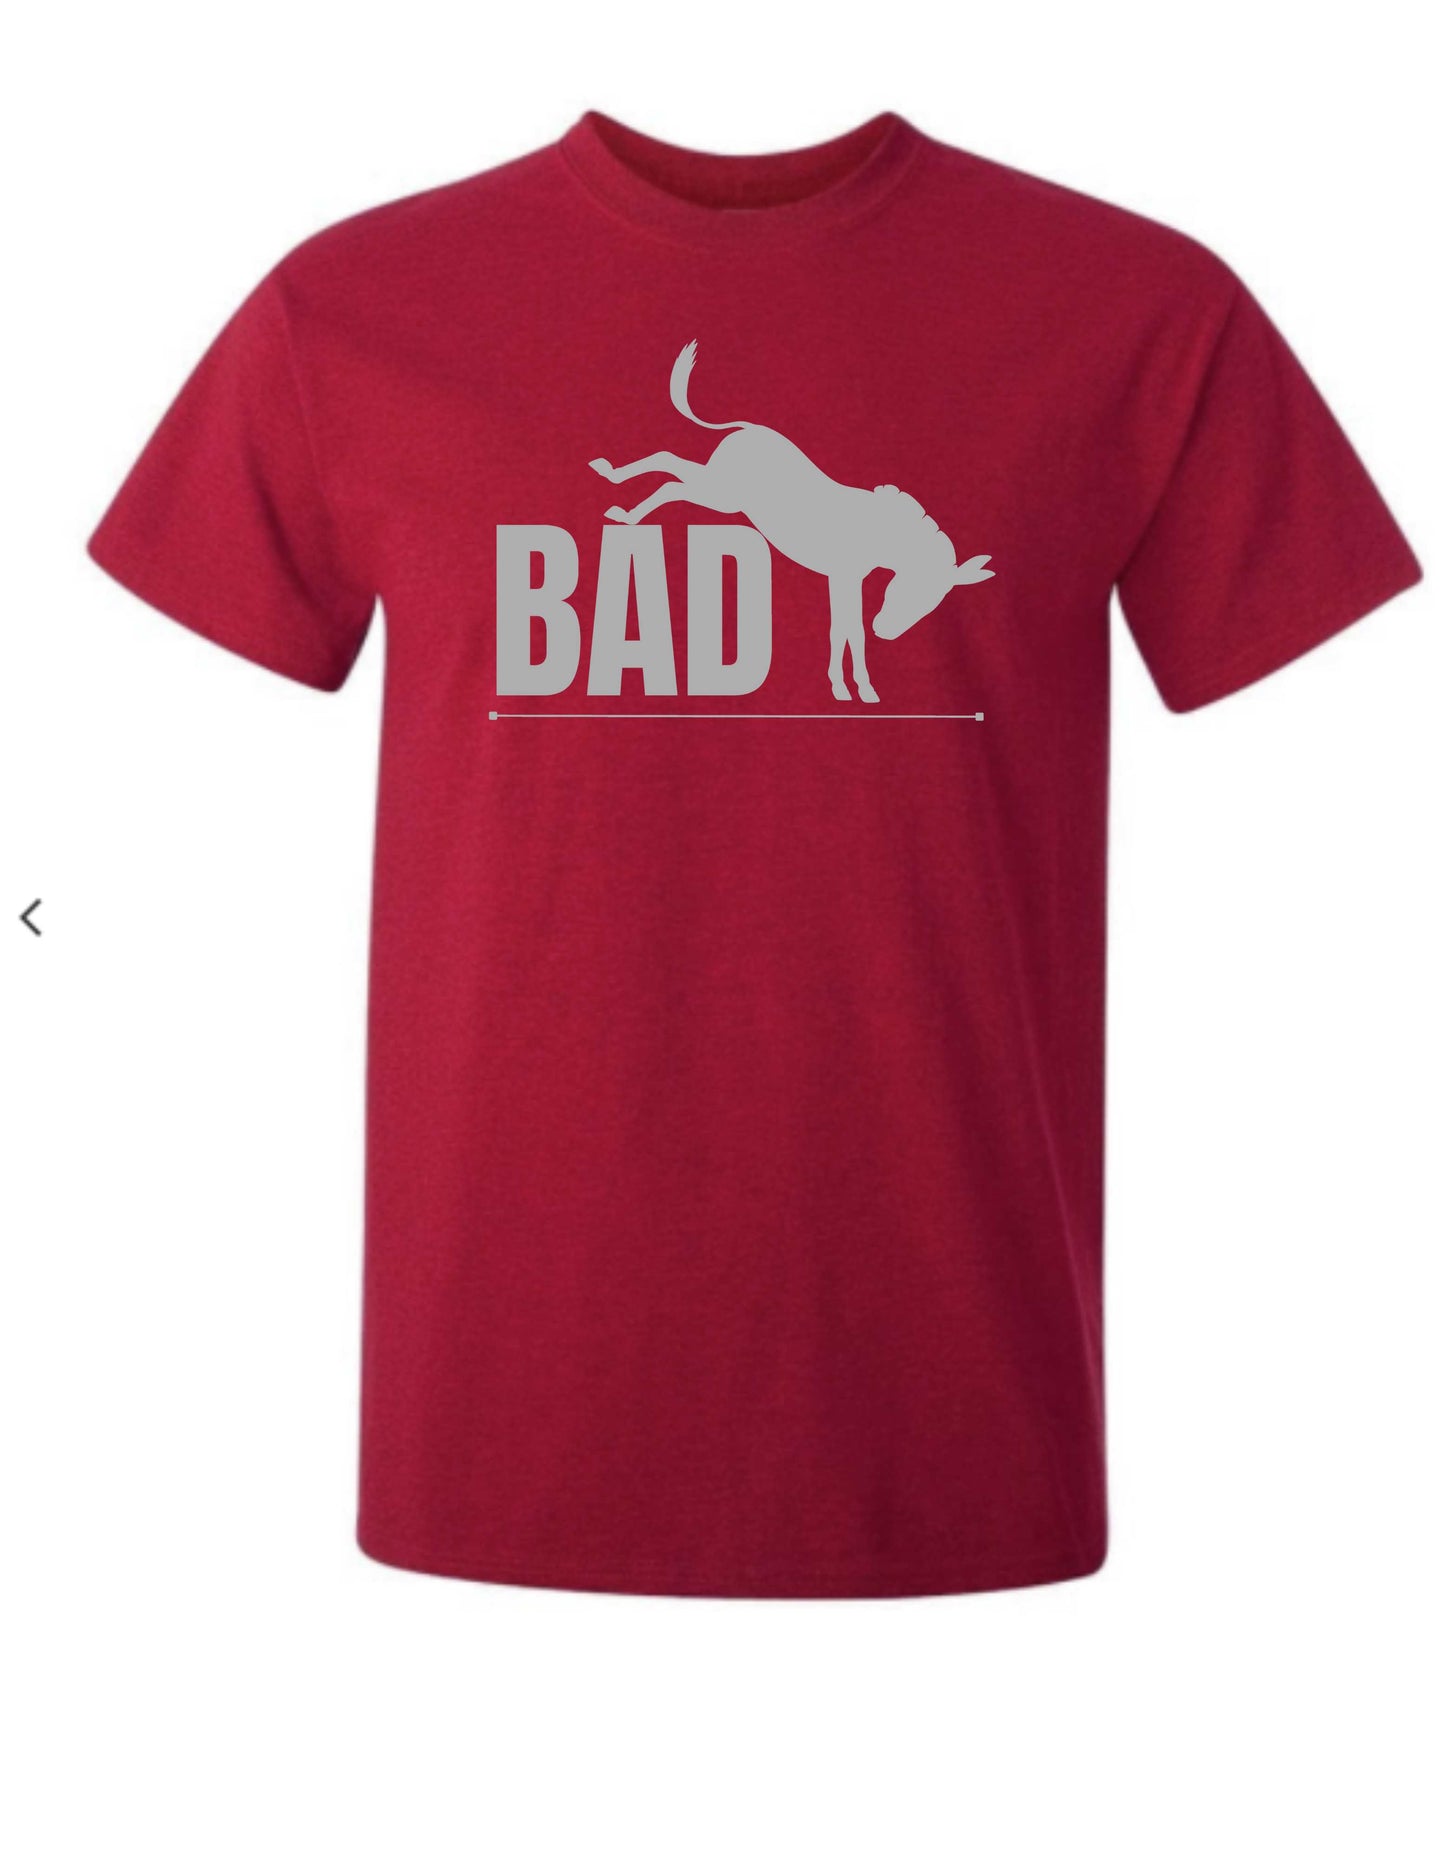 Bad A$$ - Graphic T-Shirt - Mister Snarky's